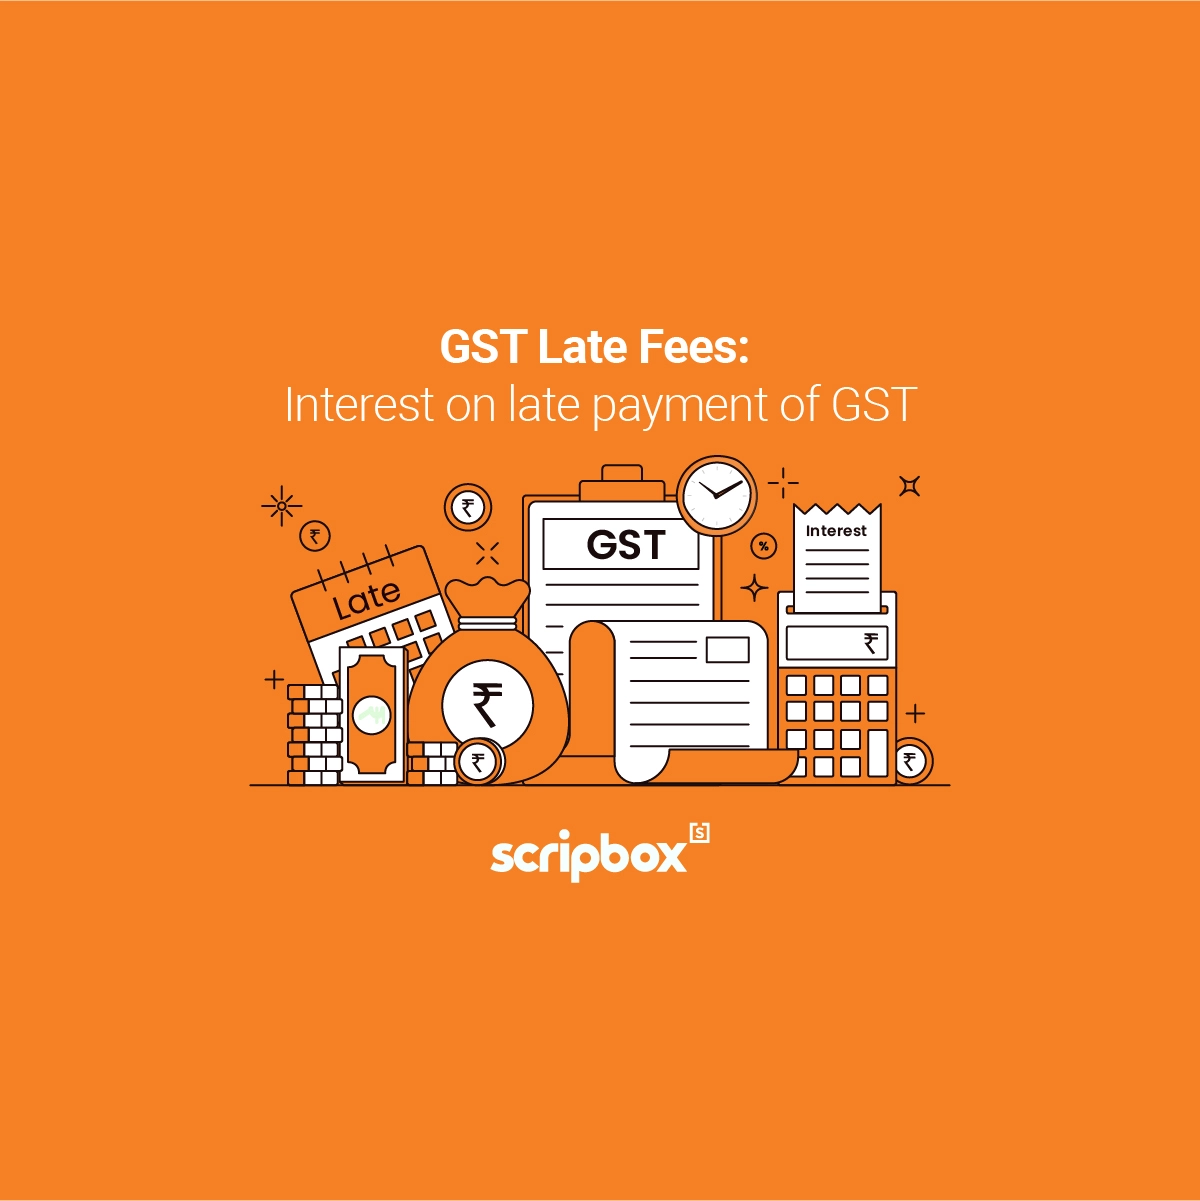 gst interest rate for late payment